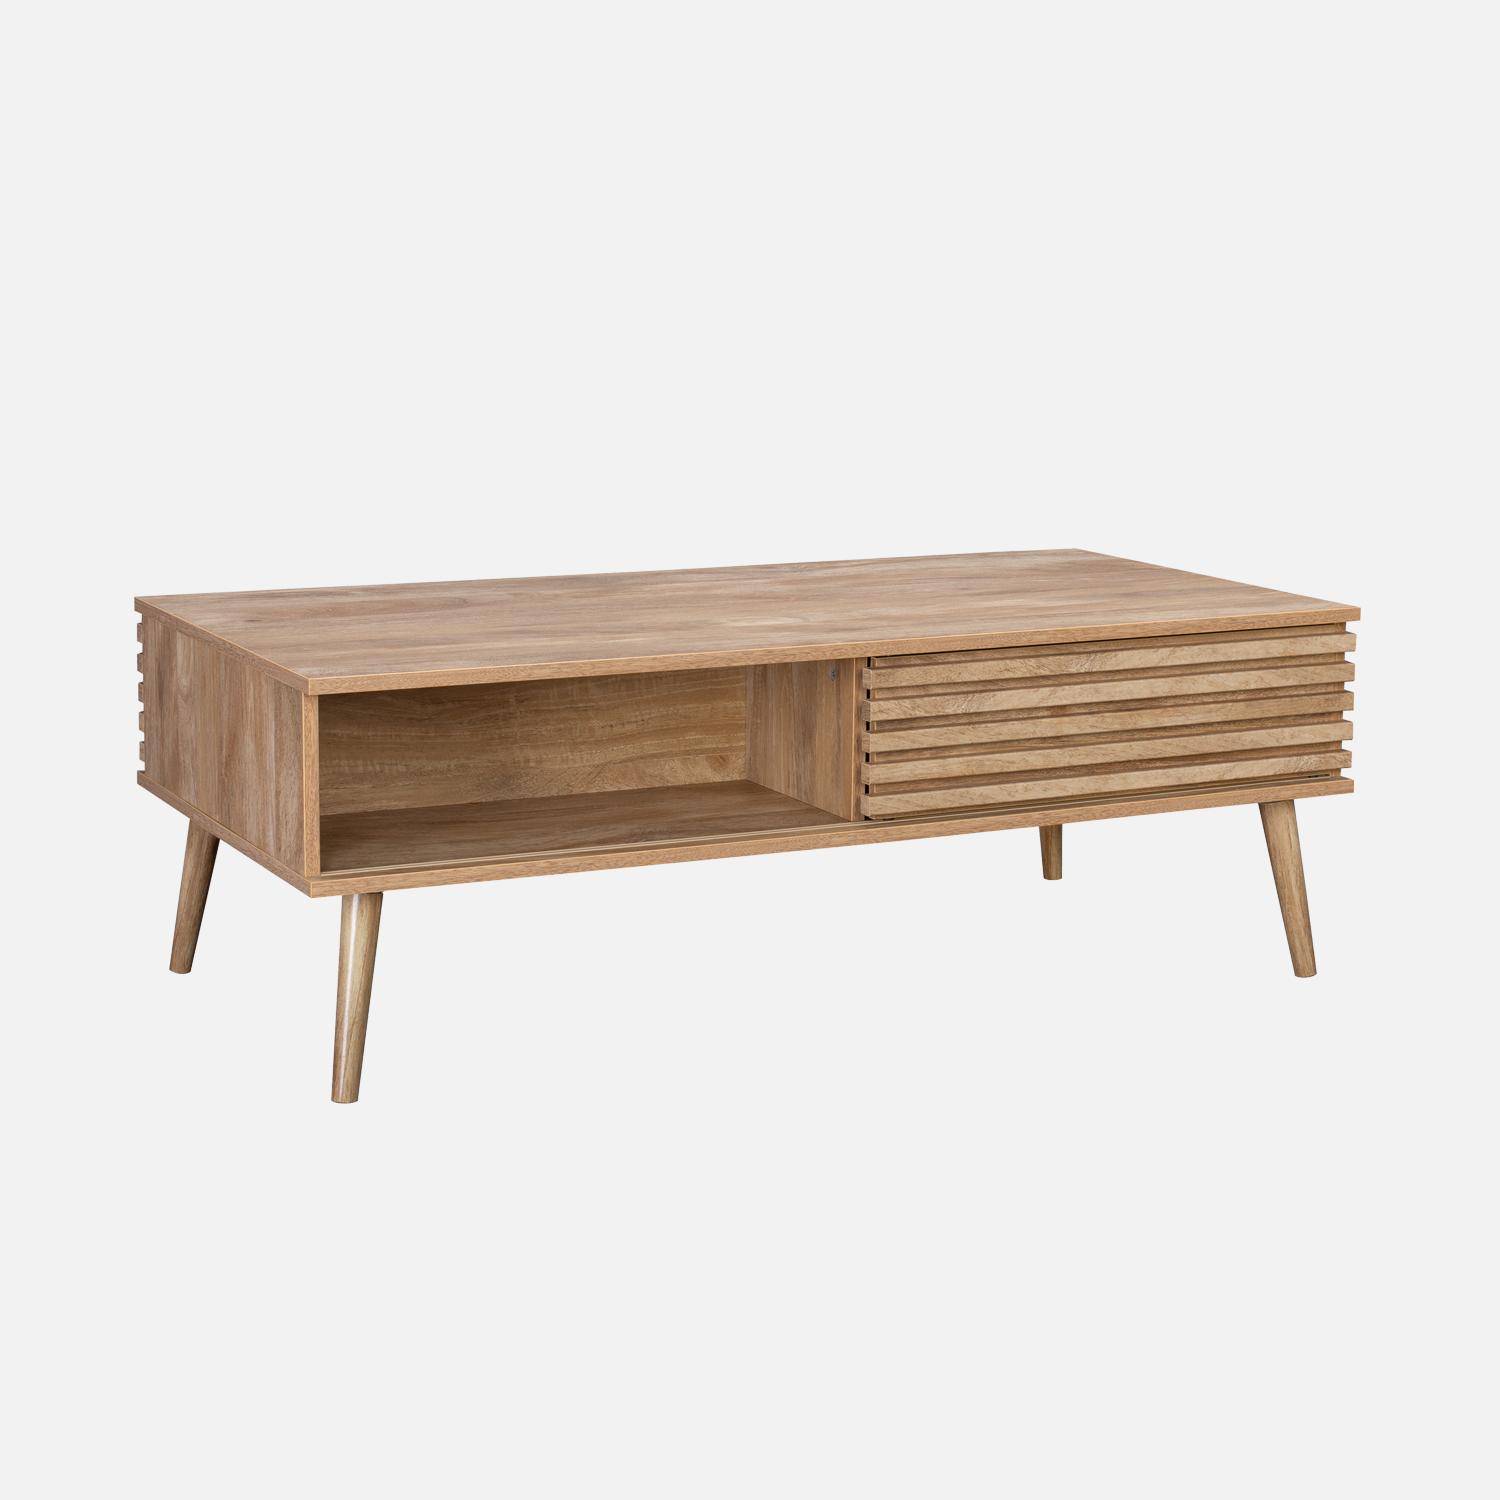 Scandinavian coffee table with grooved wood decor sliding doors and storage niches Photo5